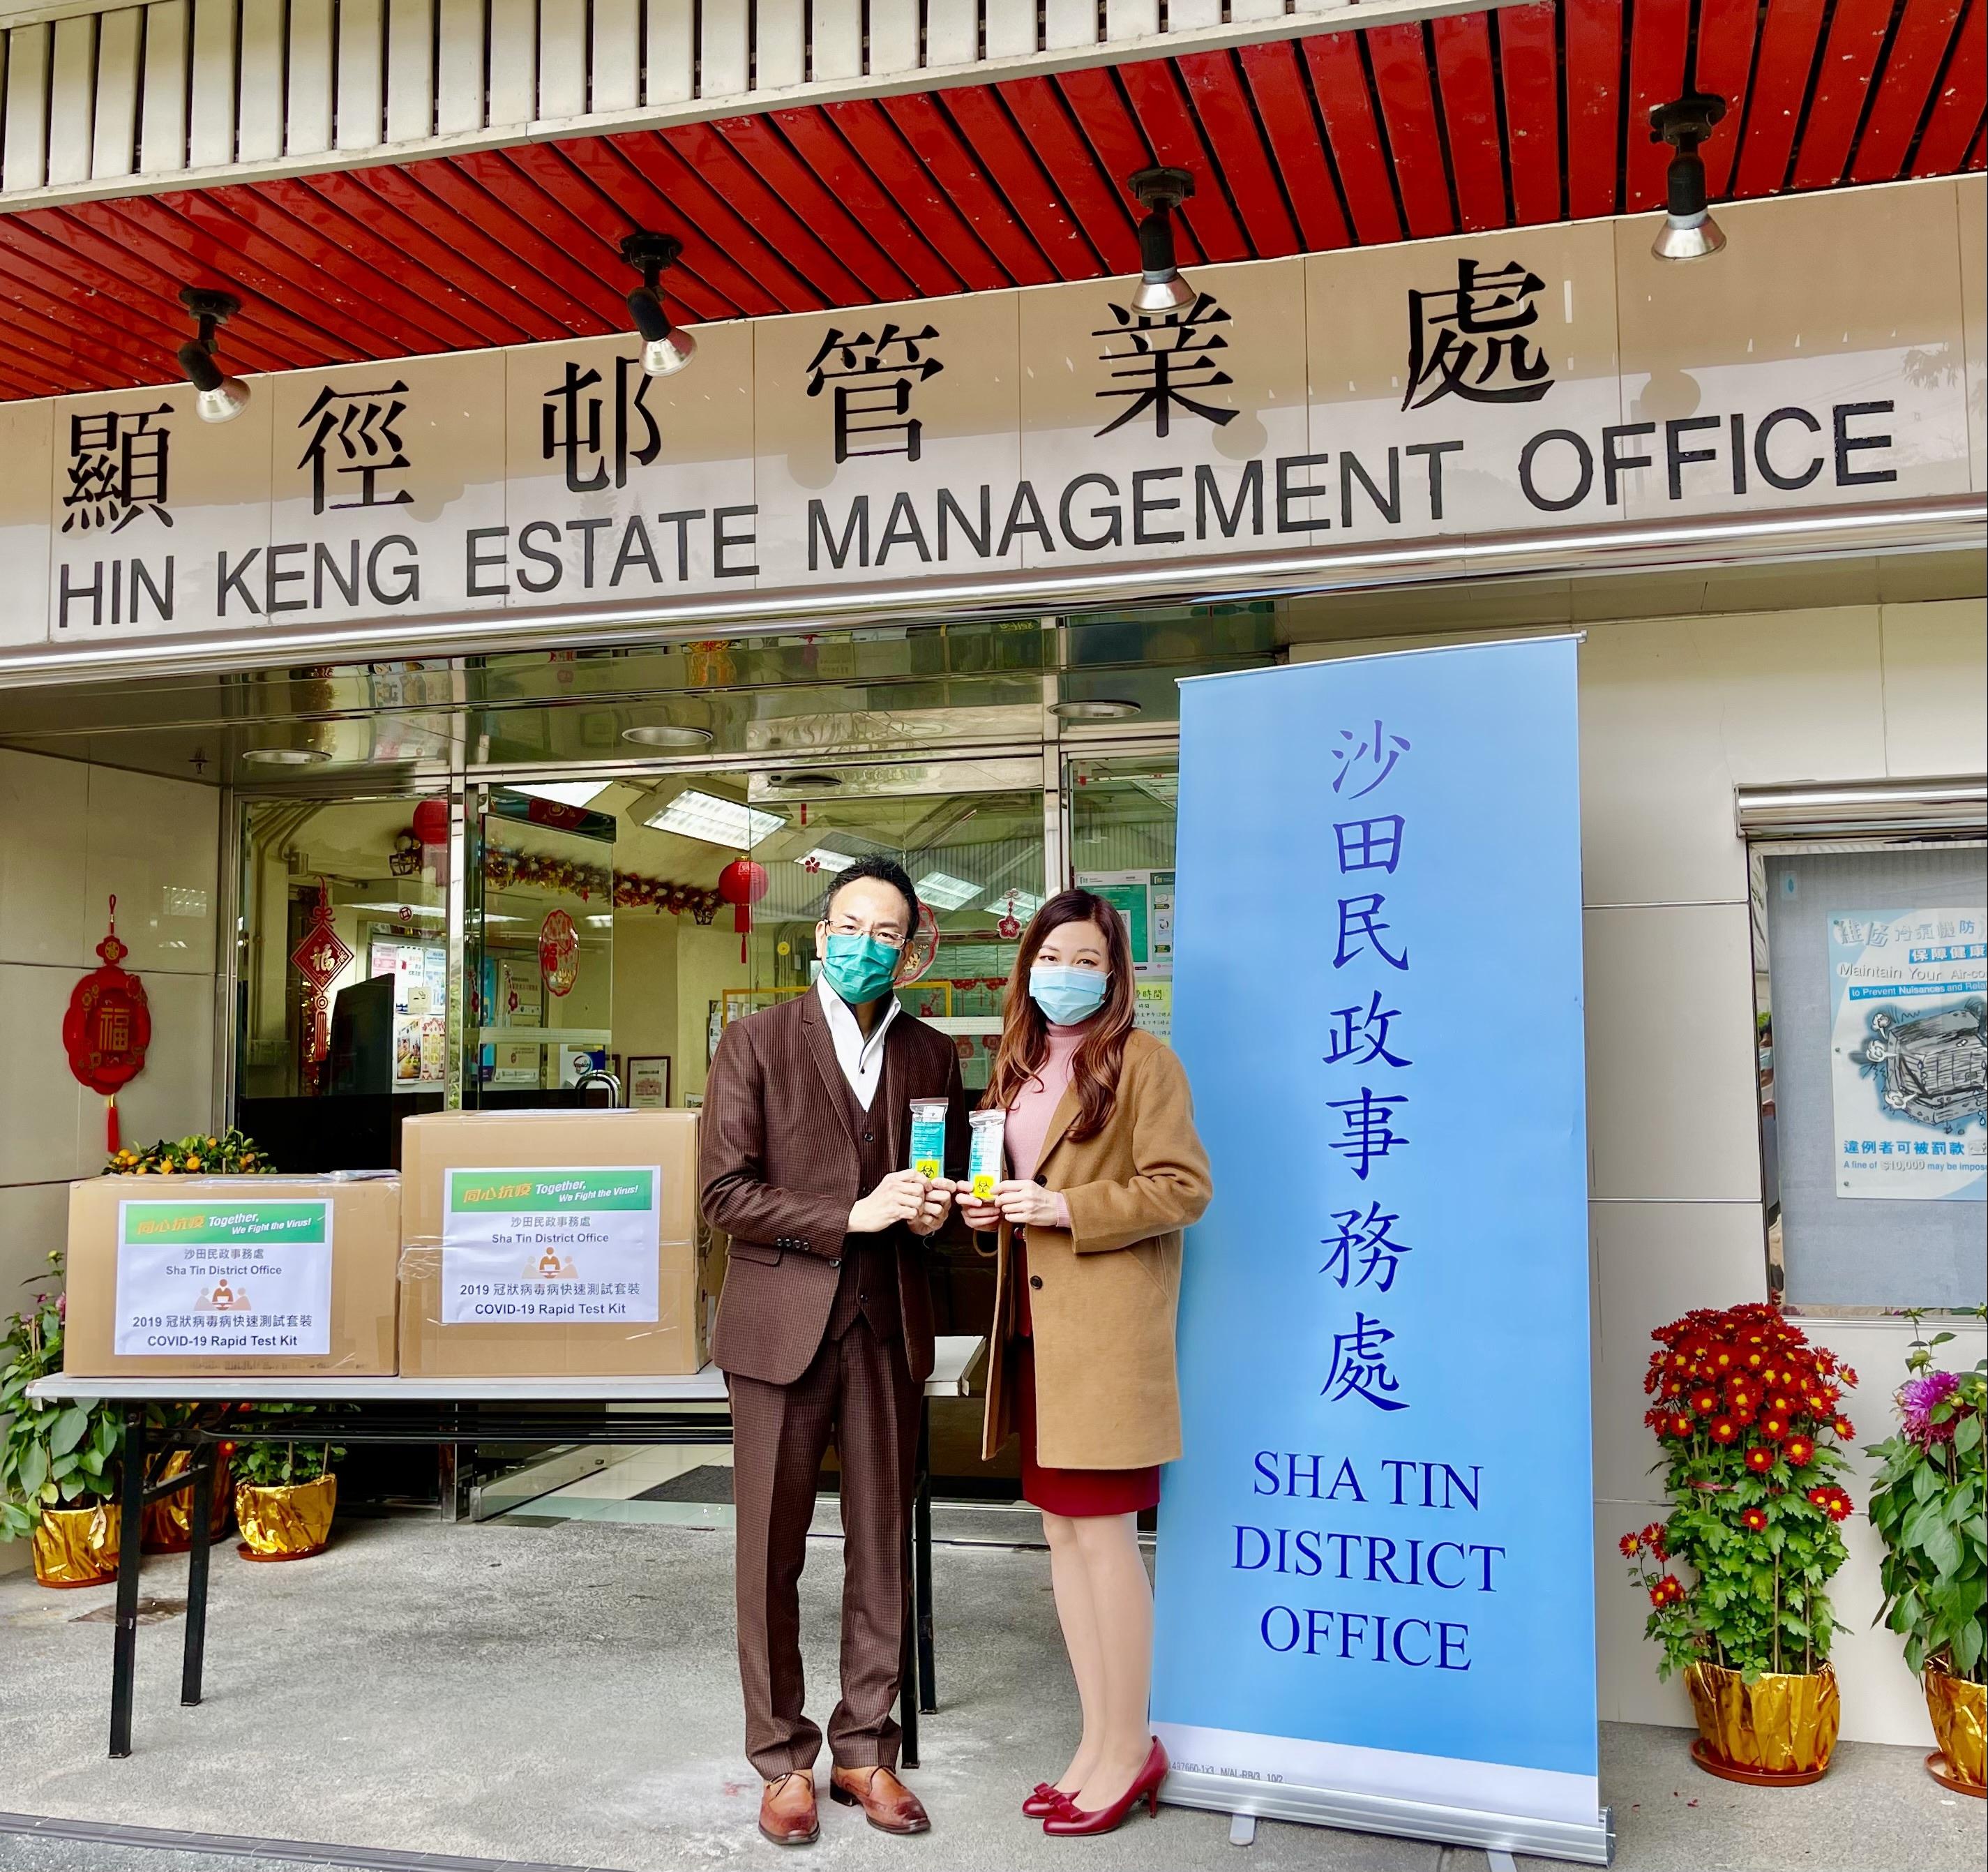 The Sha Tin District Office today (February 10) distributed rapid test kits to cleansing workers and property management staff working in the affected buildings of Lung Hang Estate, Hin Keng Estate and Ka Keng Court in Tai Wai for voluntary testing through their property management companies.